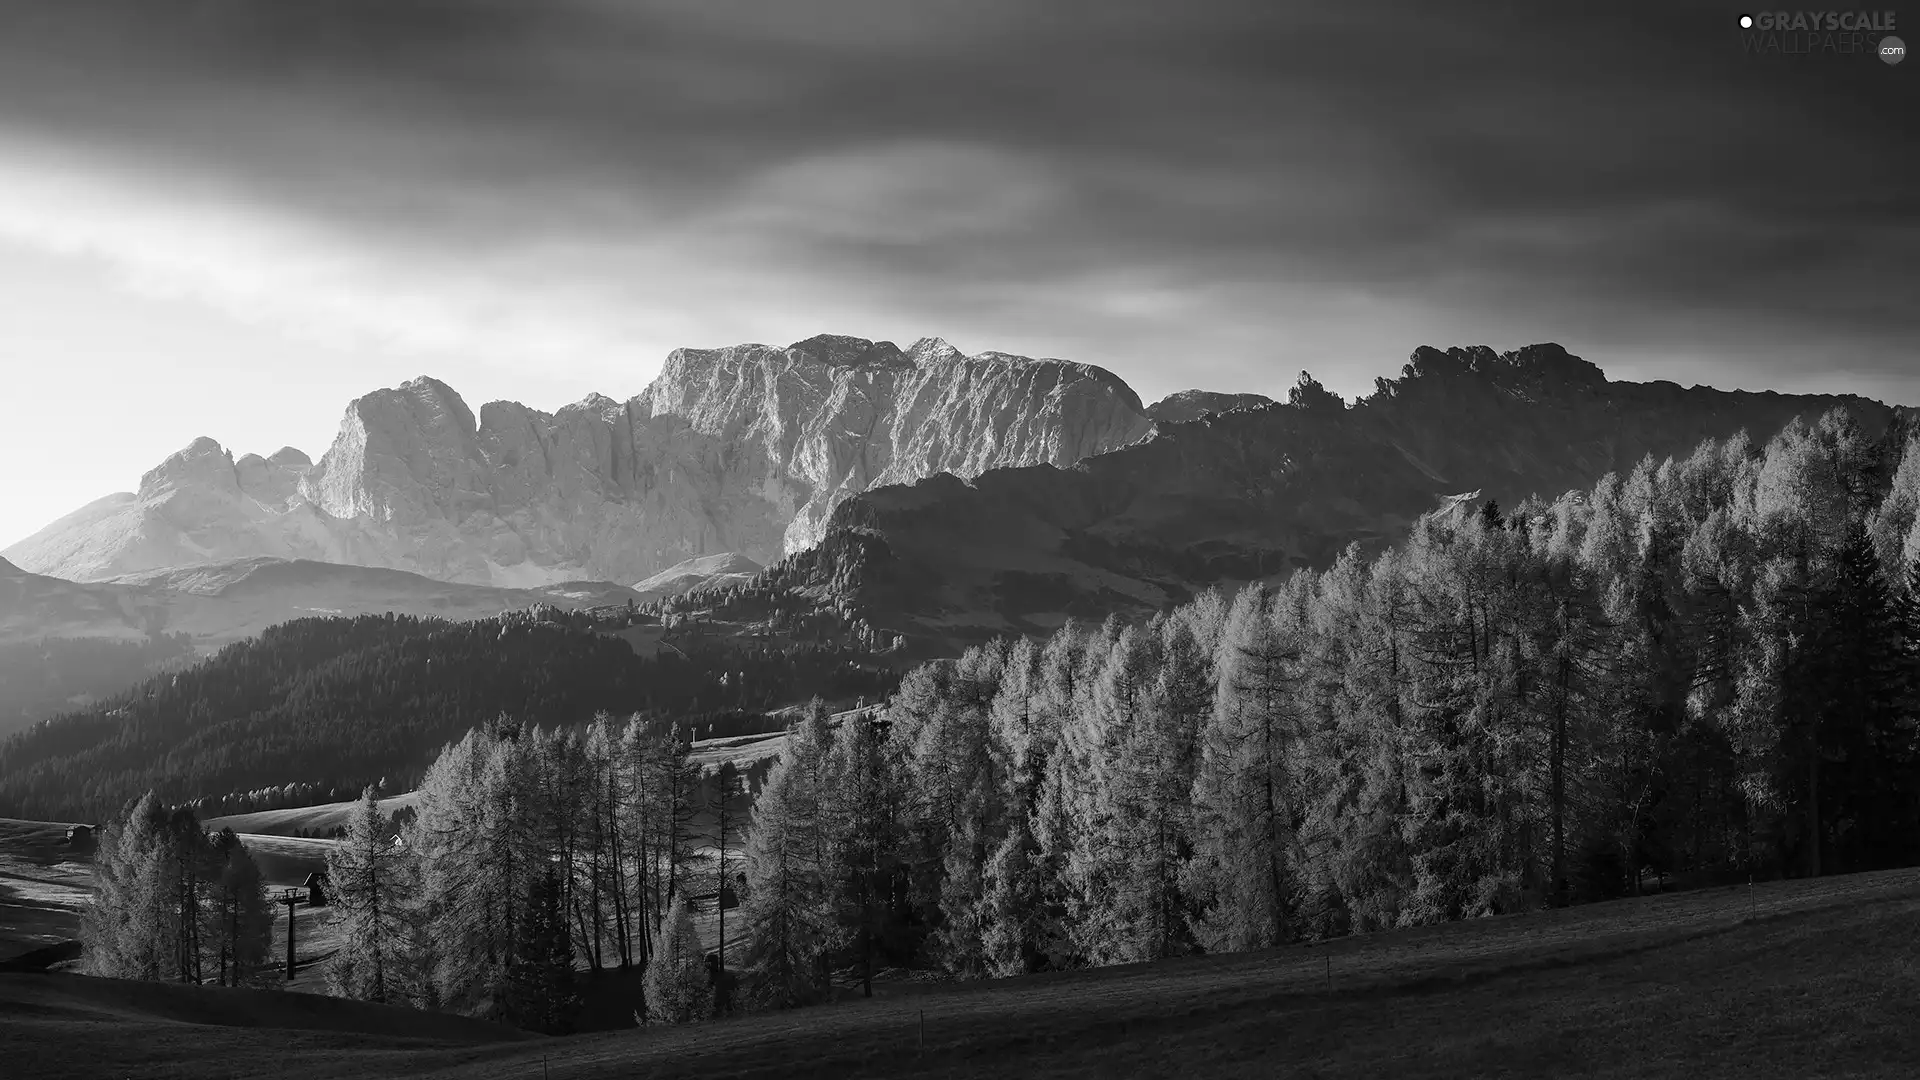 Dolomites, forest, clouds, trees, autumn, Mountains, Italy, viewes